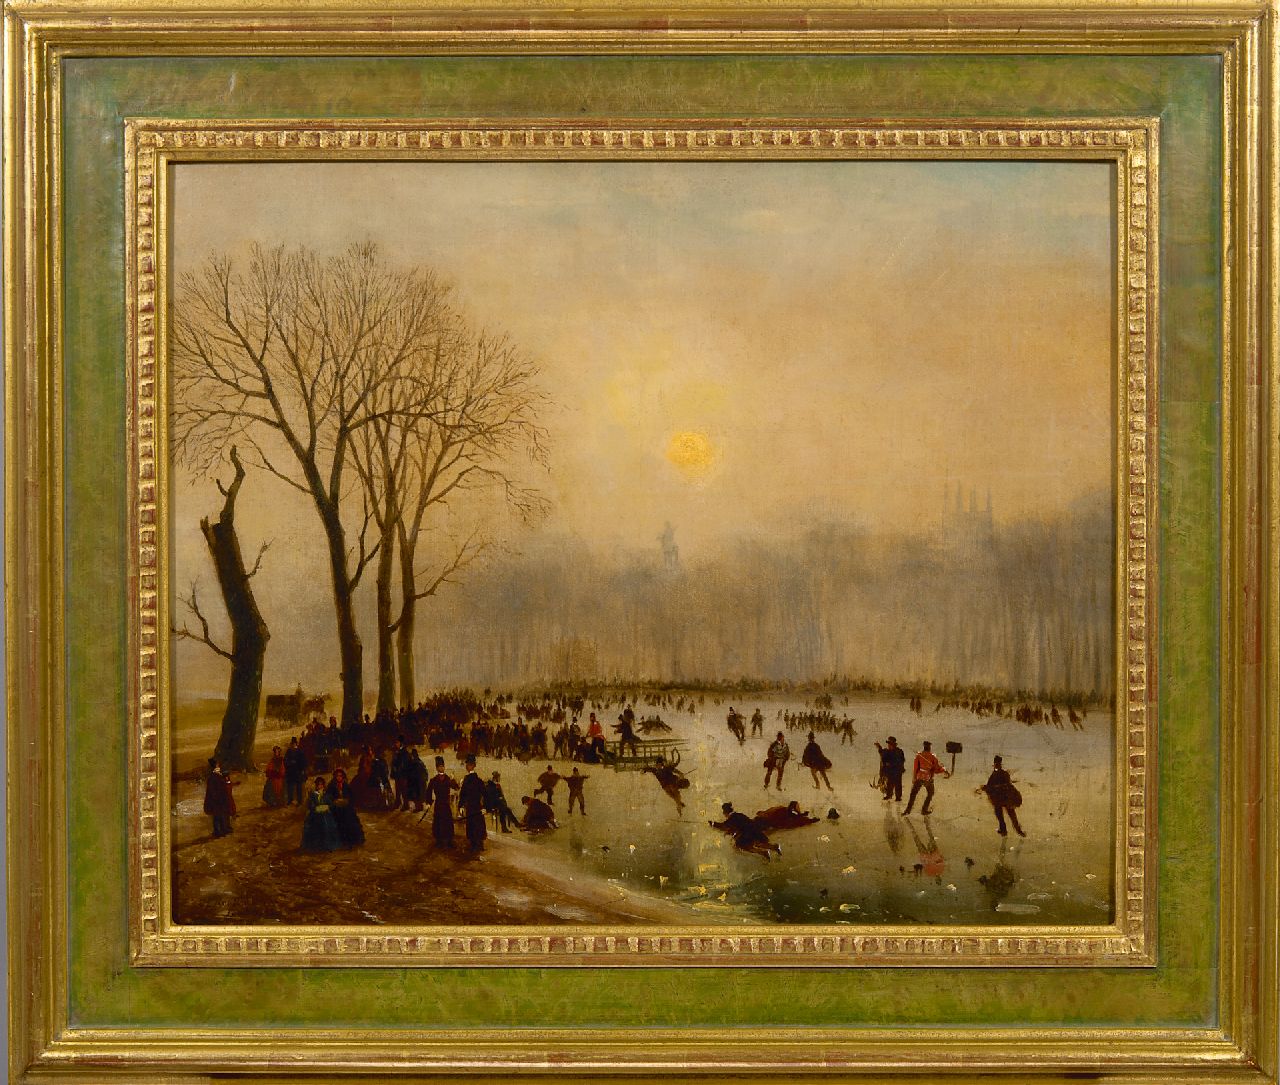 Roosenboom N.J.  | Nicolaas Johannes Roosenboom | Paintings offered for sale | Skating fun on The Serpentine, Hyde Park, oil on canvas 43.3 x 53.7 cm, signed l.l. and dated 'London' '55